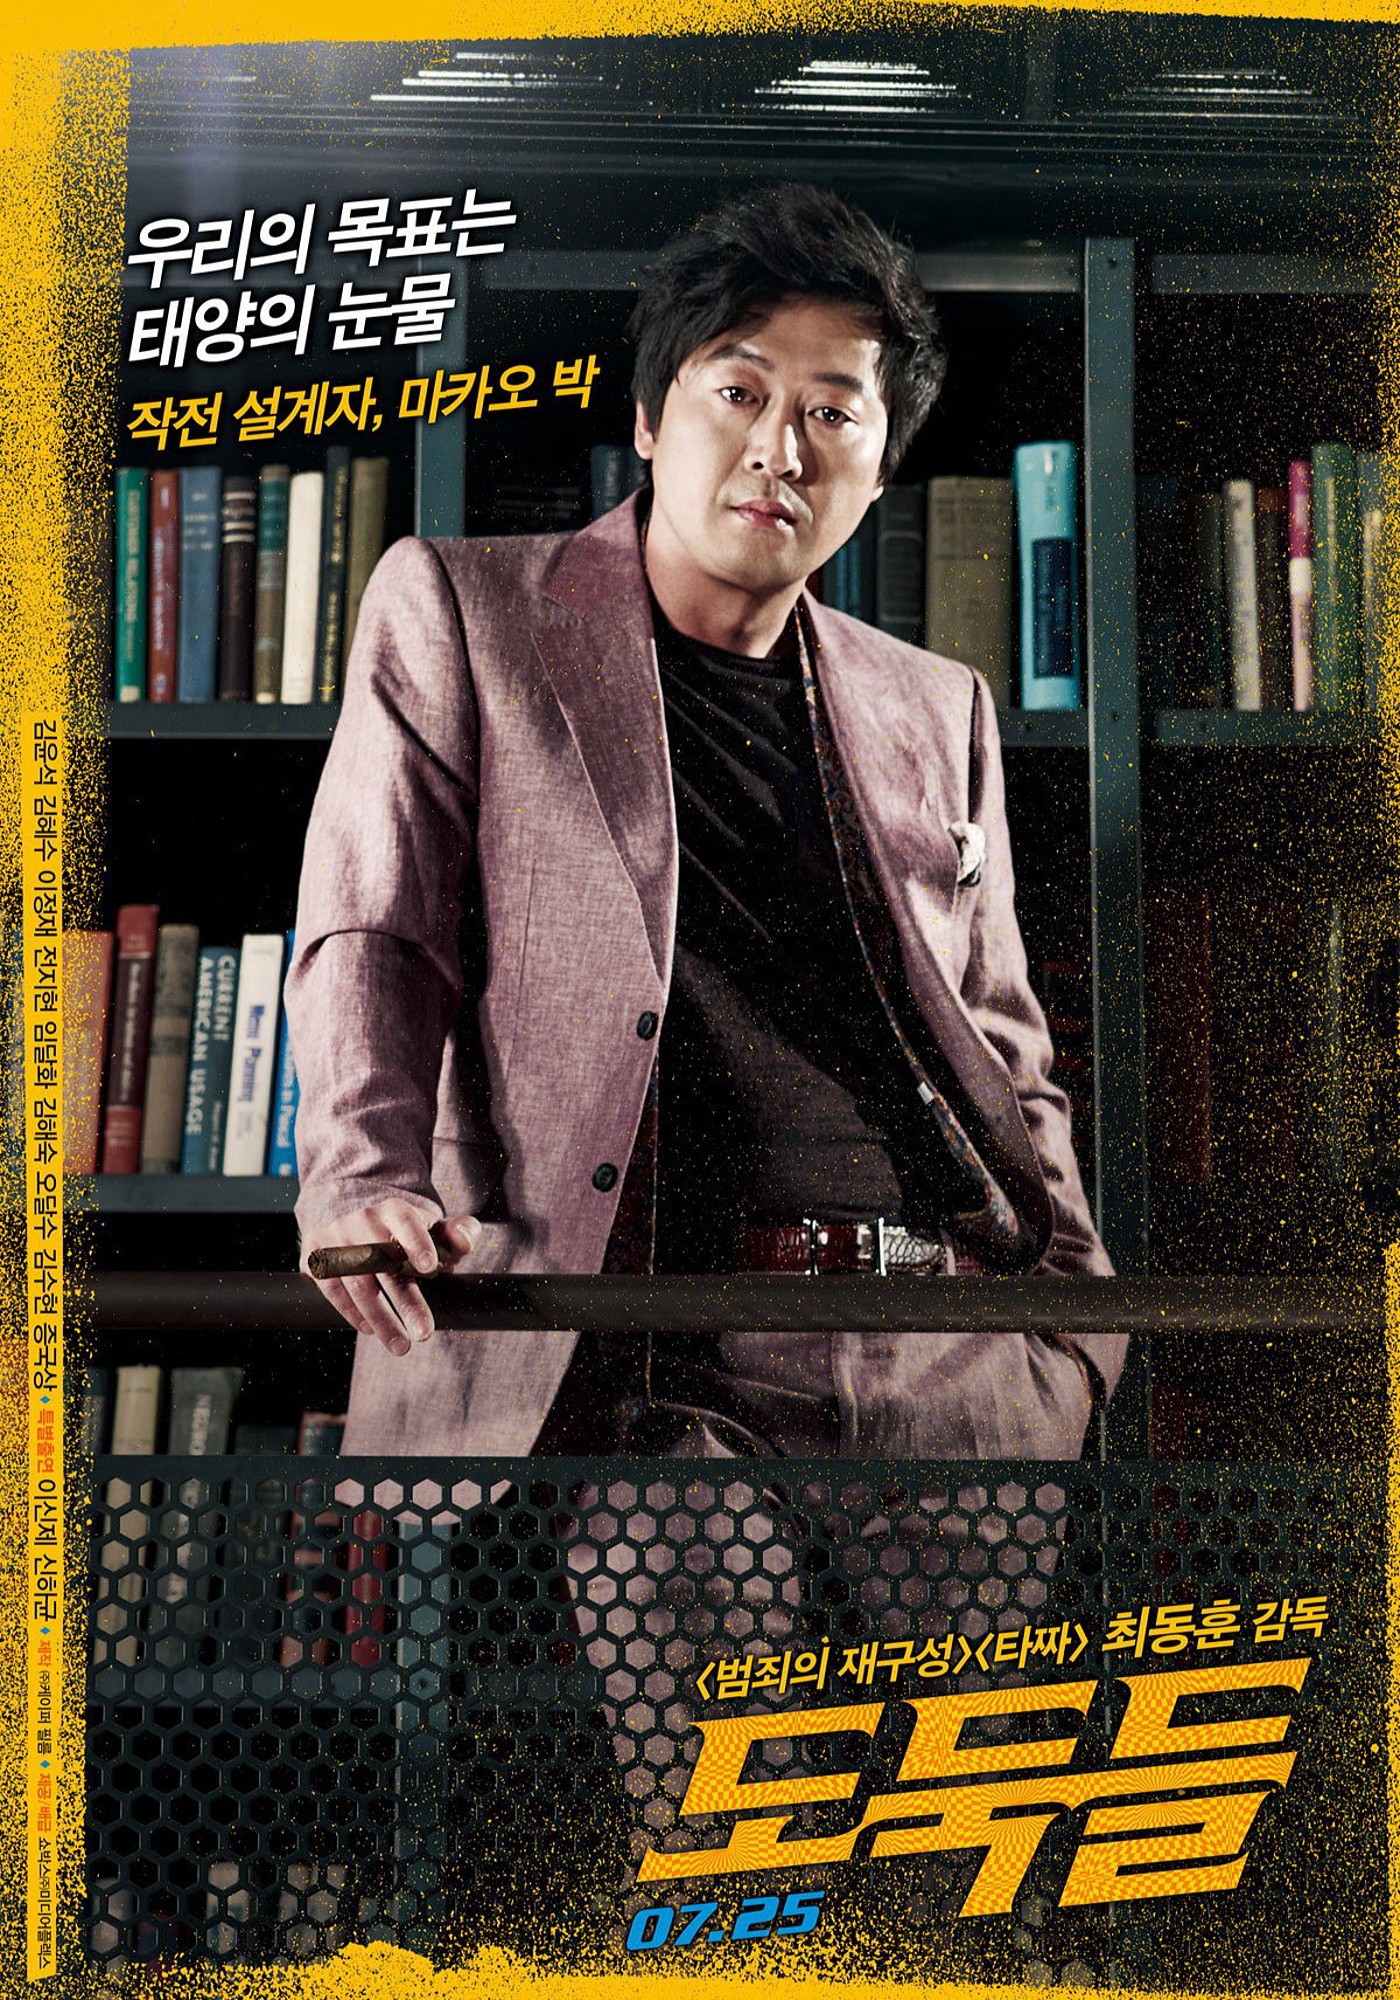 Mega Sized Movie Poster Image for Dodookdeul (#5 of 9)